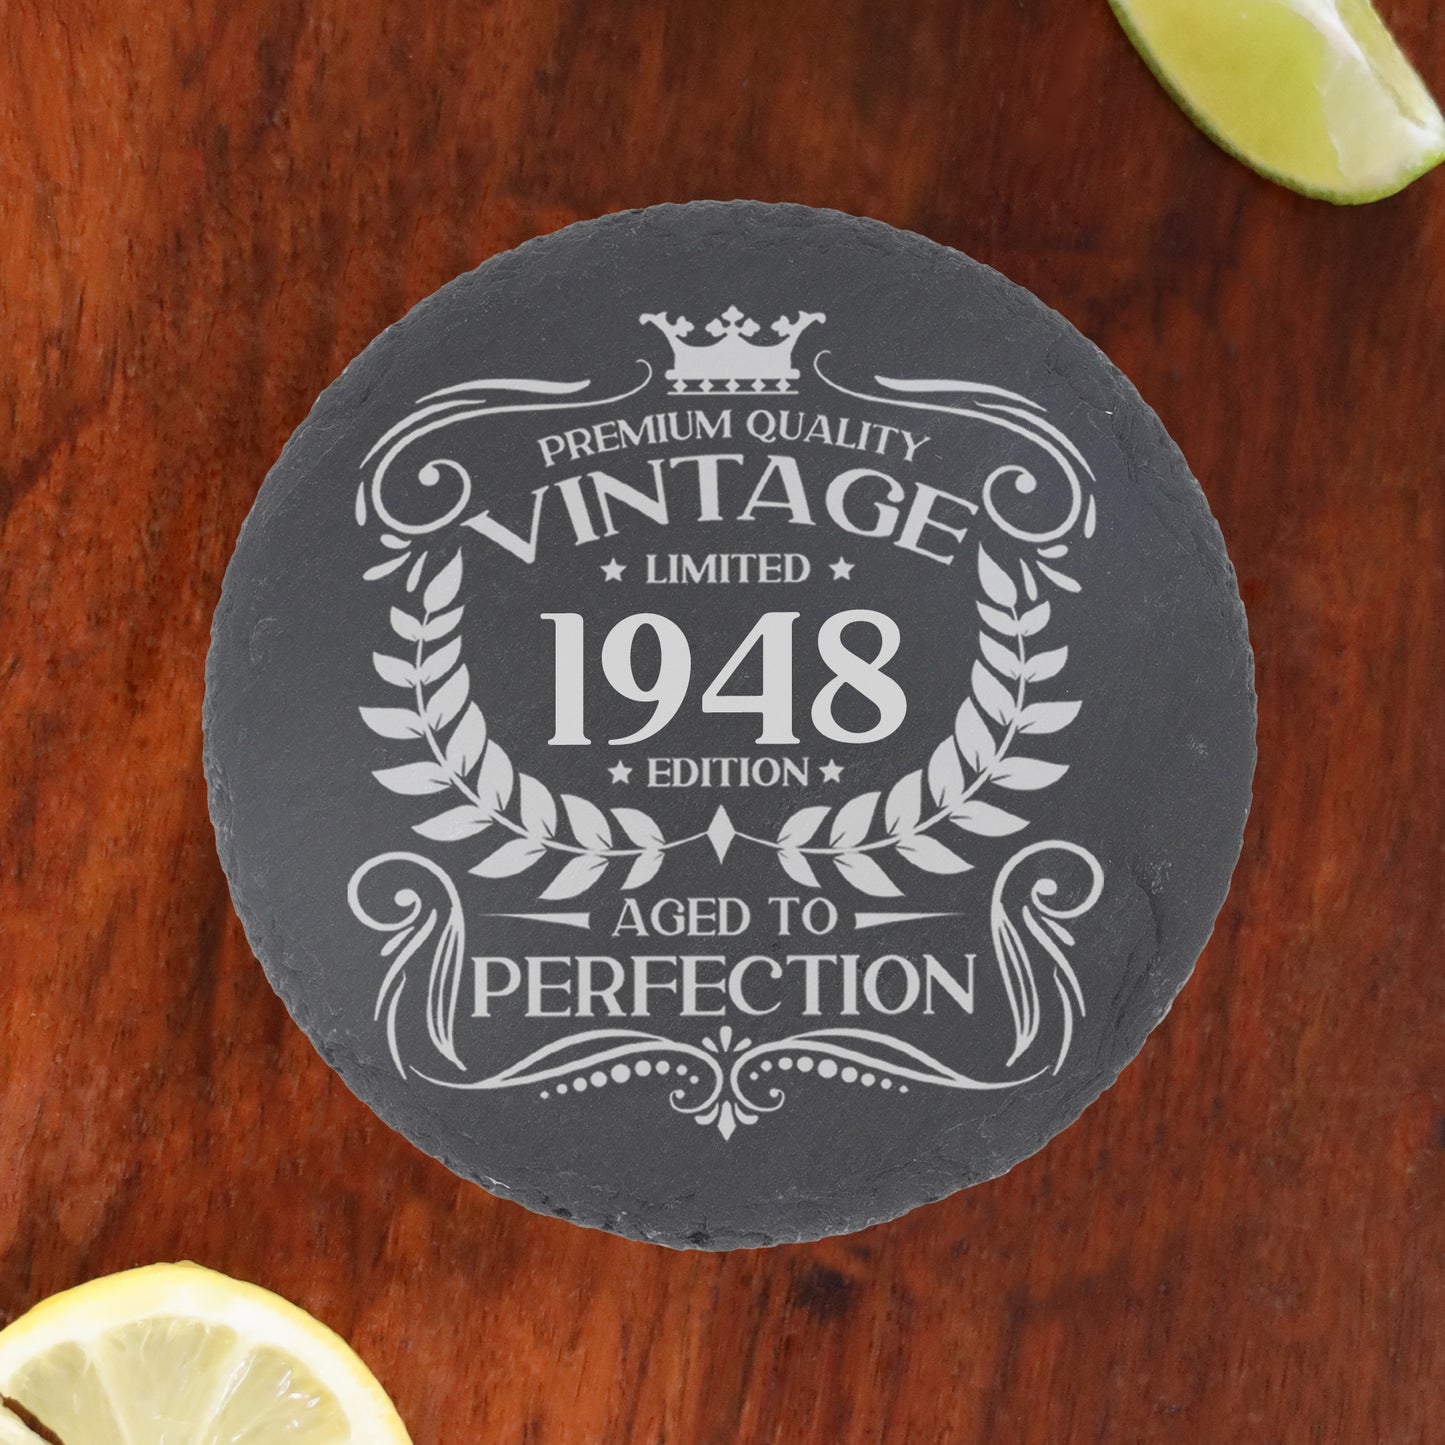 Personalised Vintage 1948 Mug and/or Coaster  - Always Looking Good - Round Coaster On Its Own  